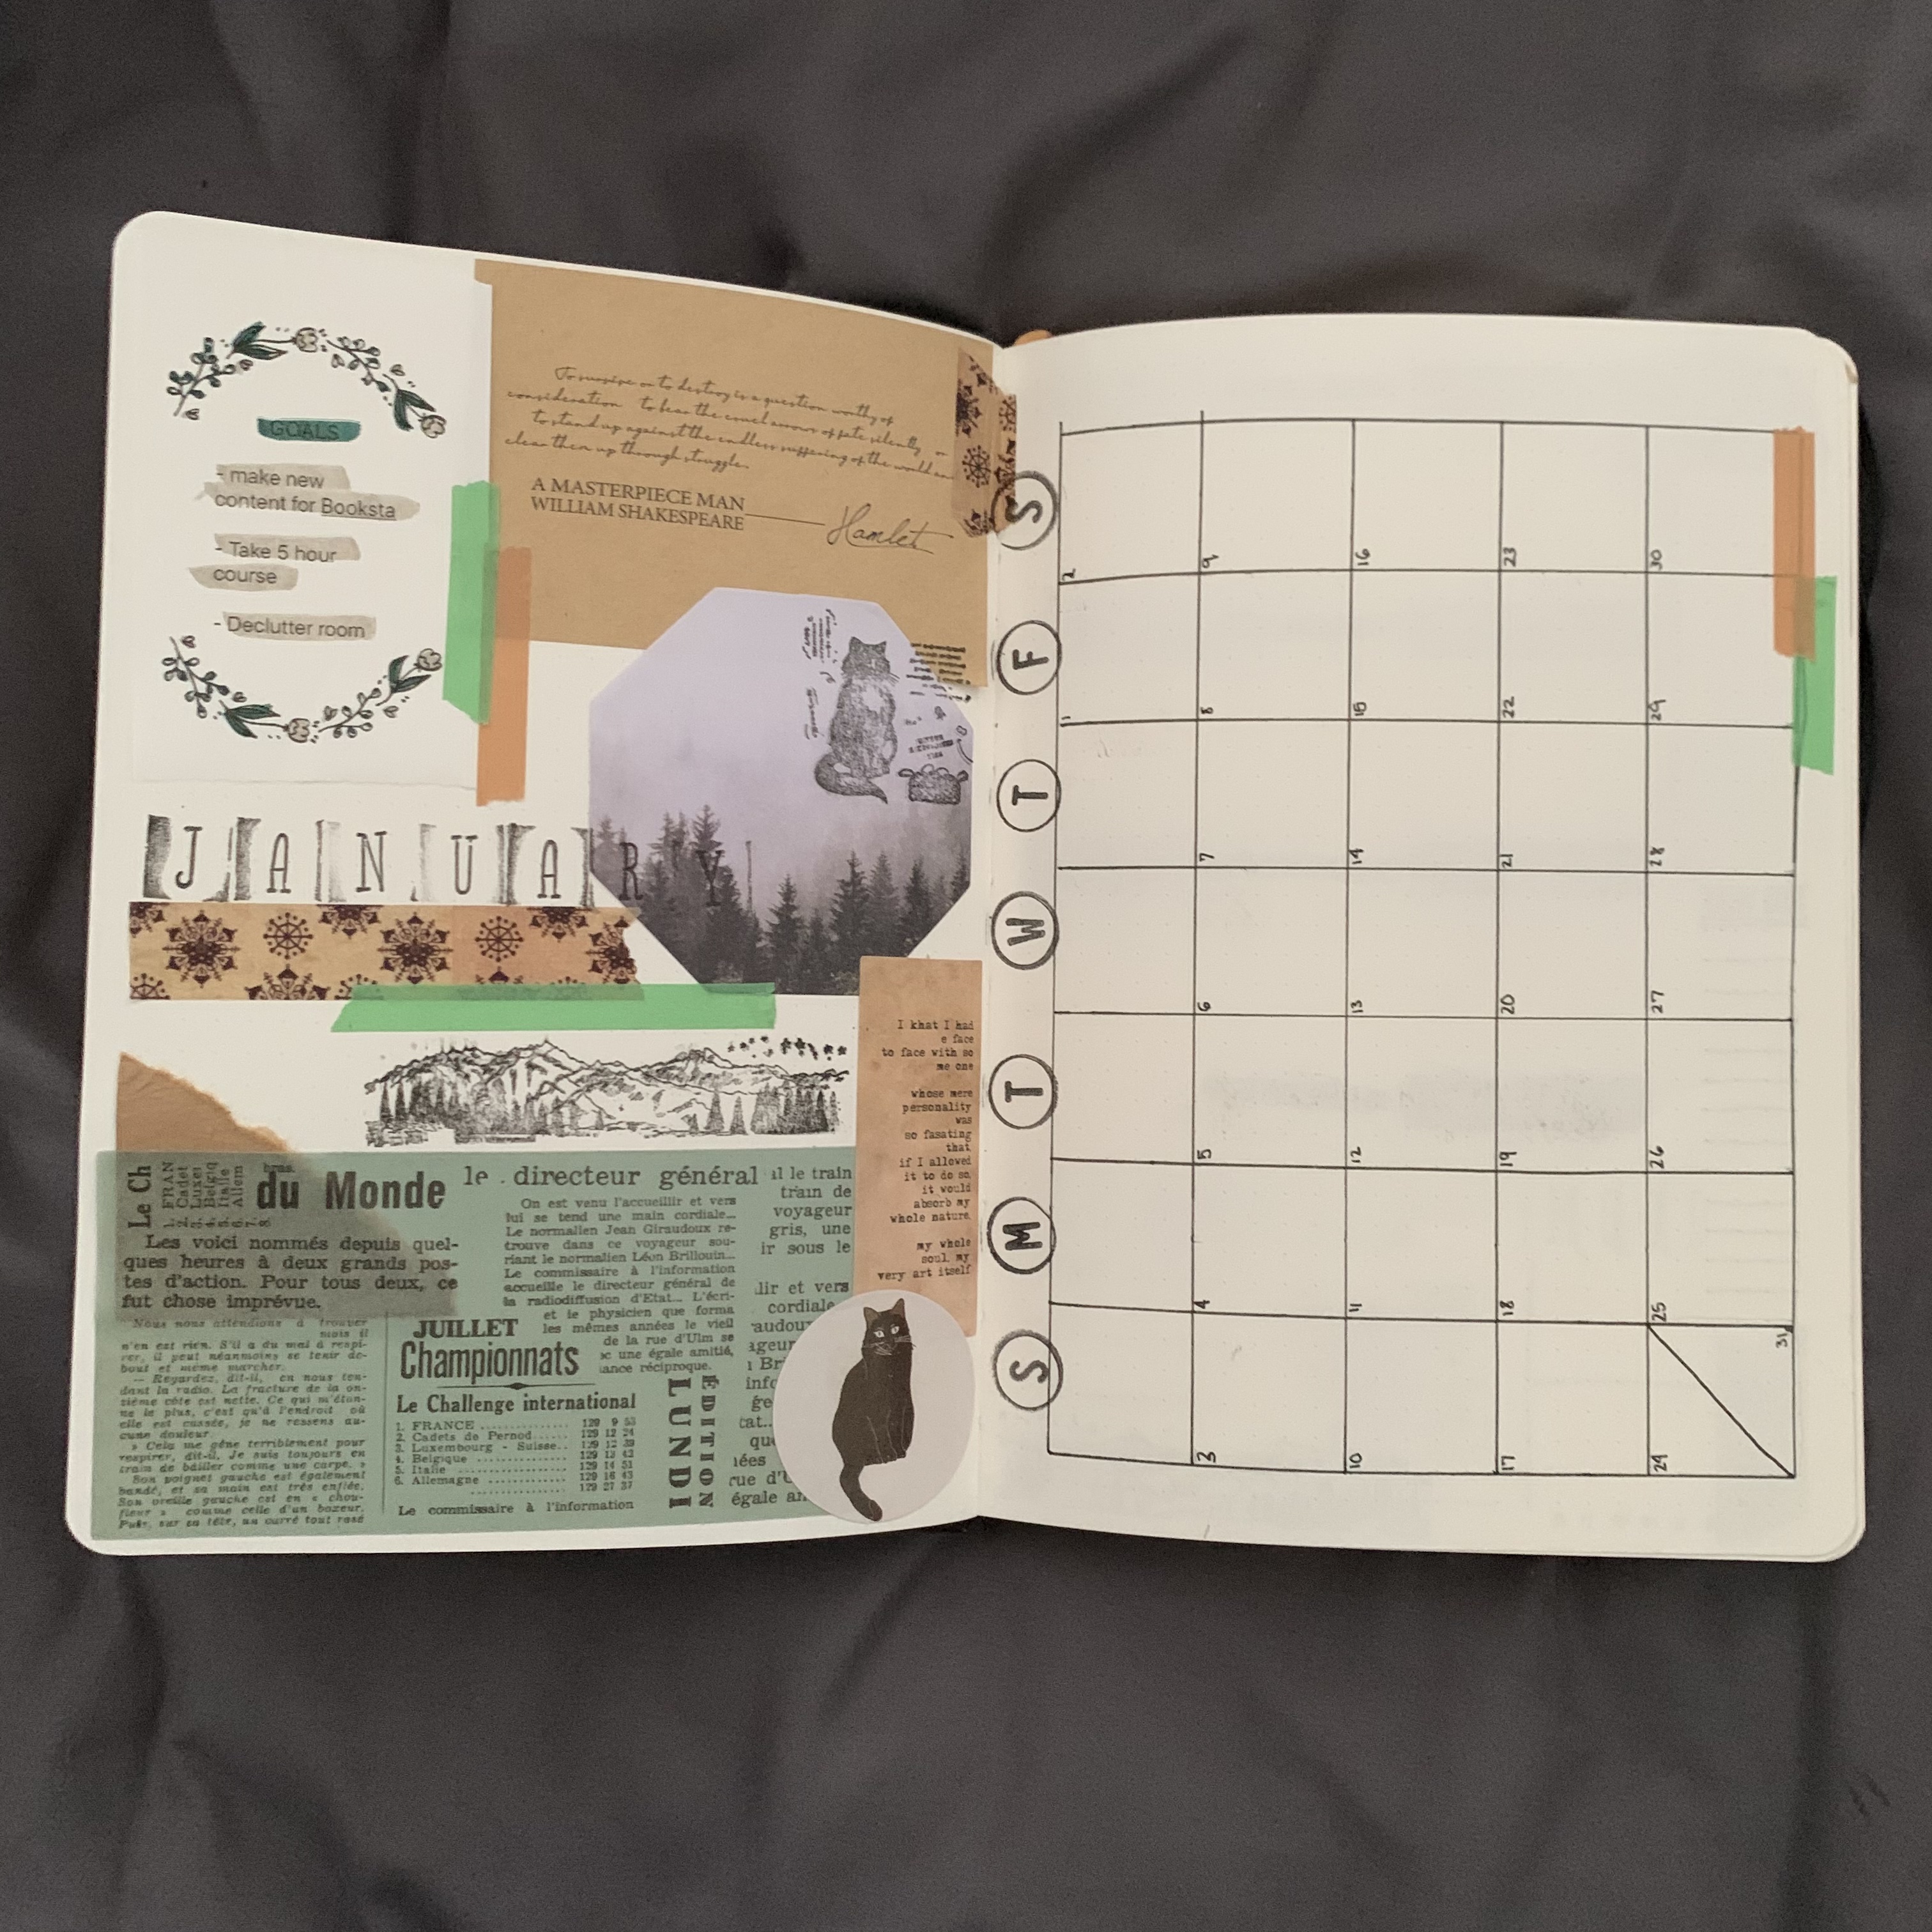 2021 BuJo – January pages